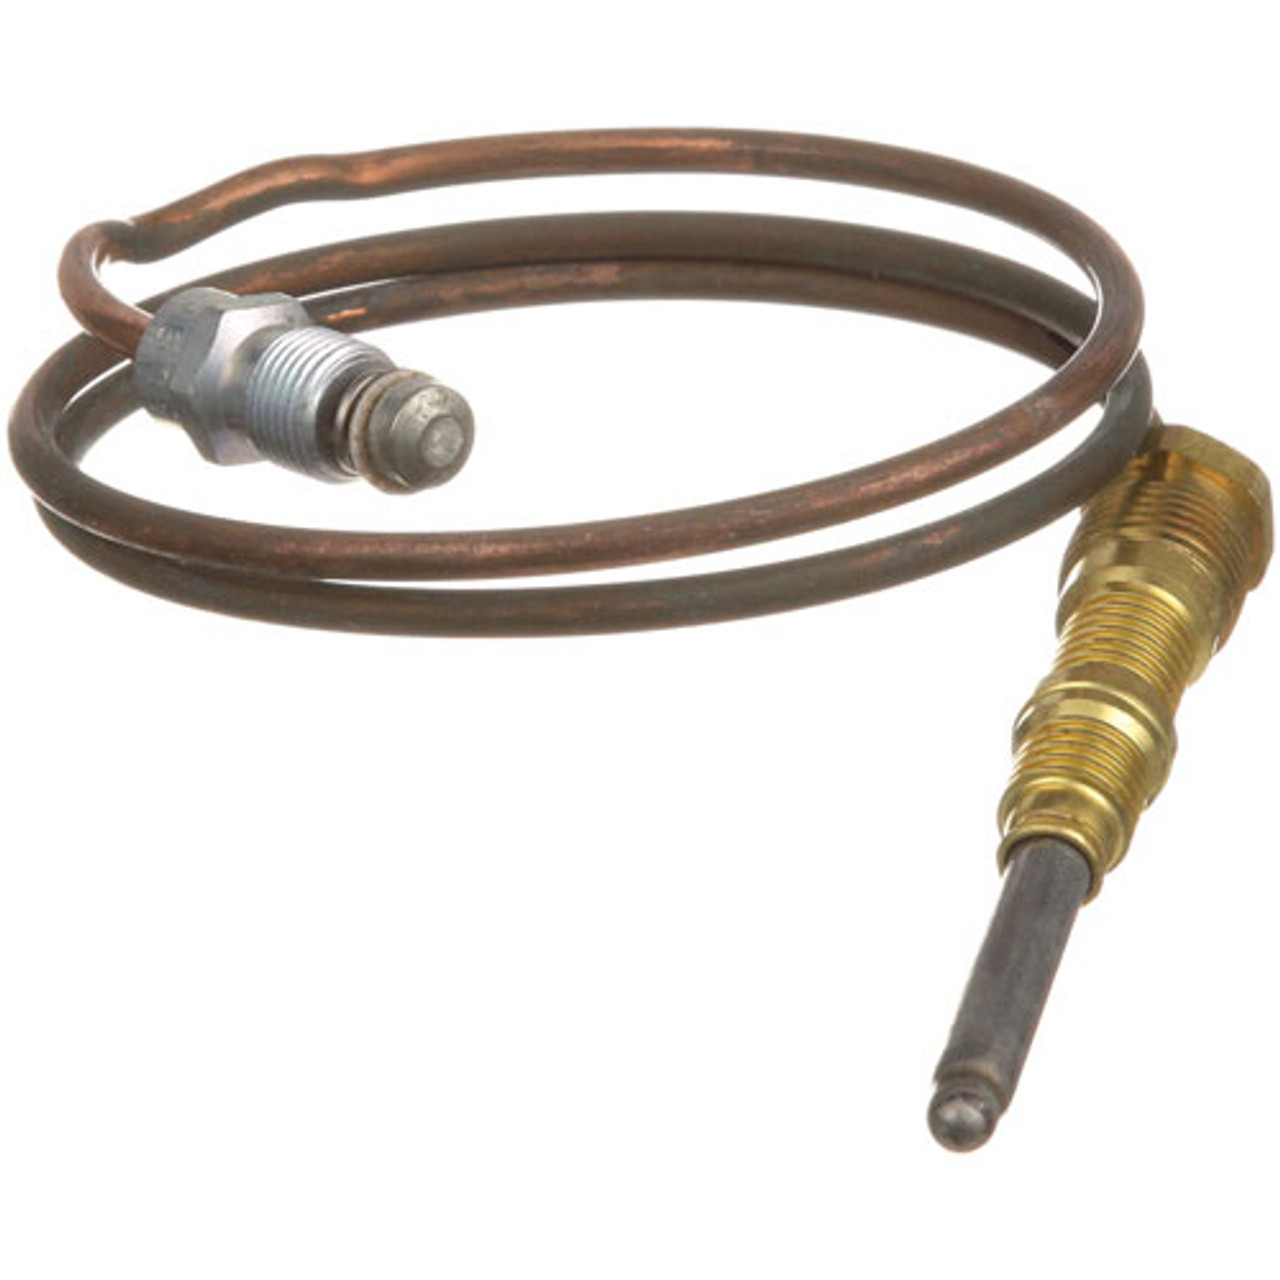 H/D Thermocouple - Replacement Part For Vulcan Hart 412788-24